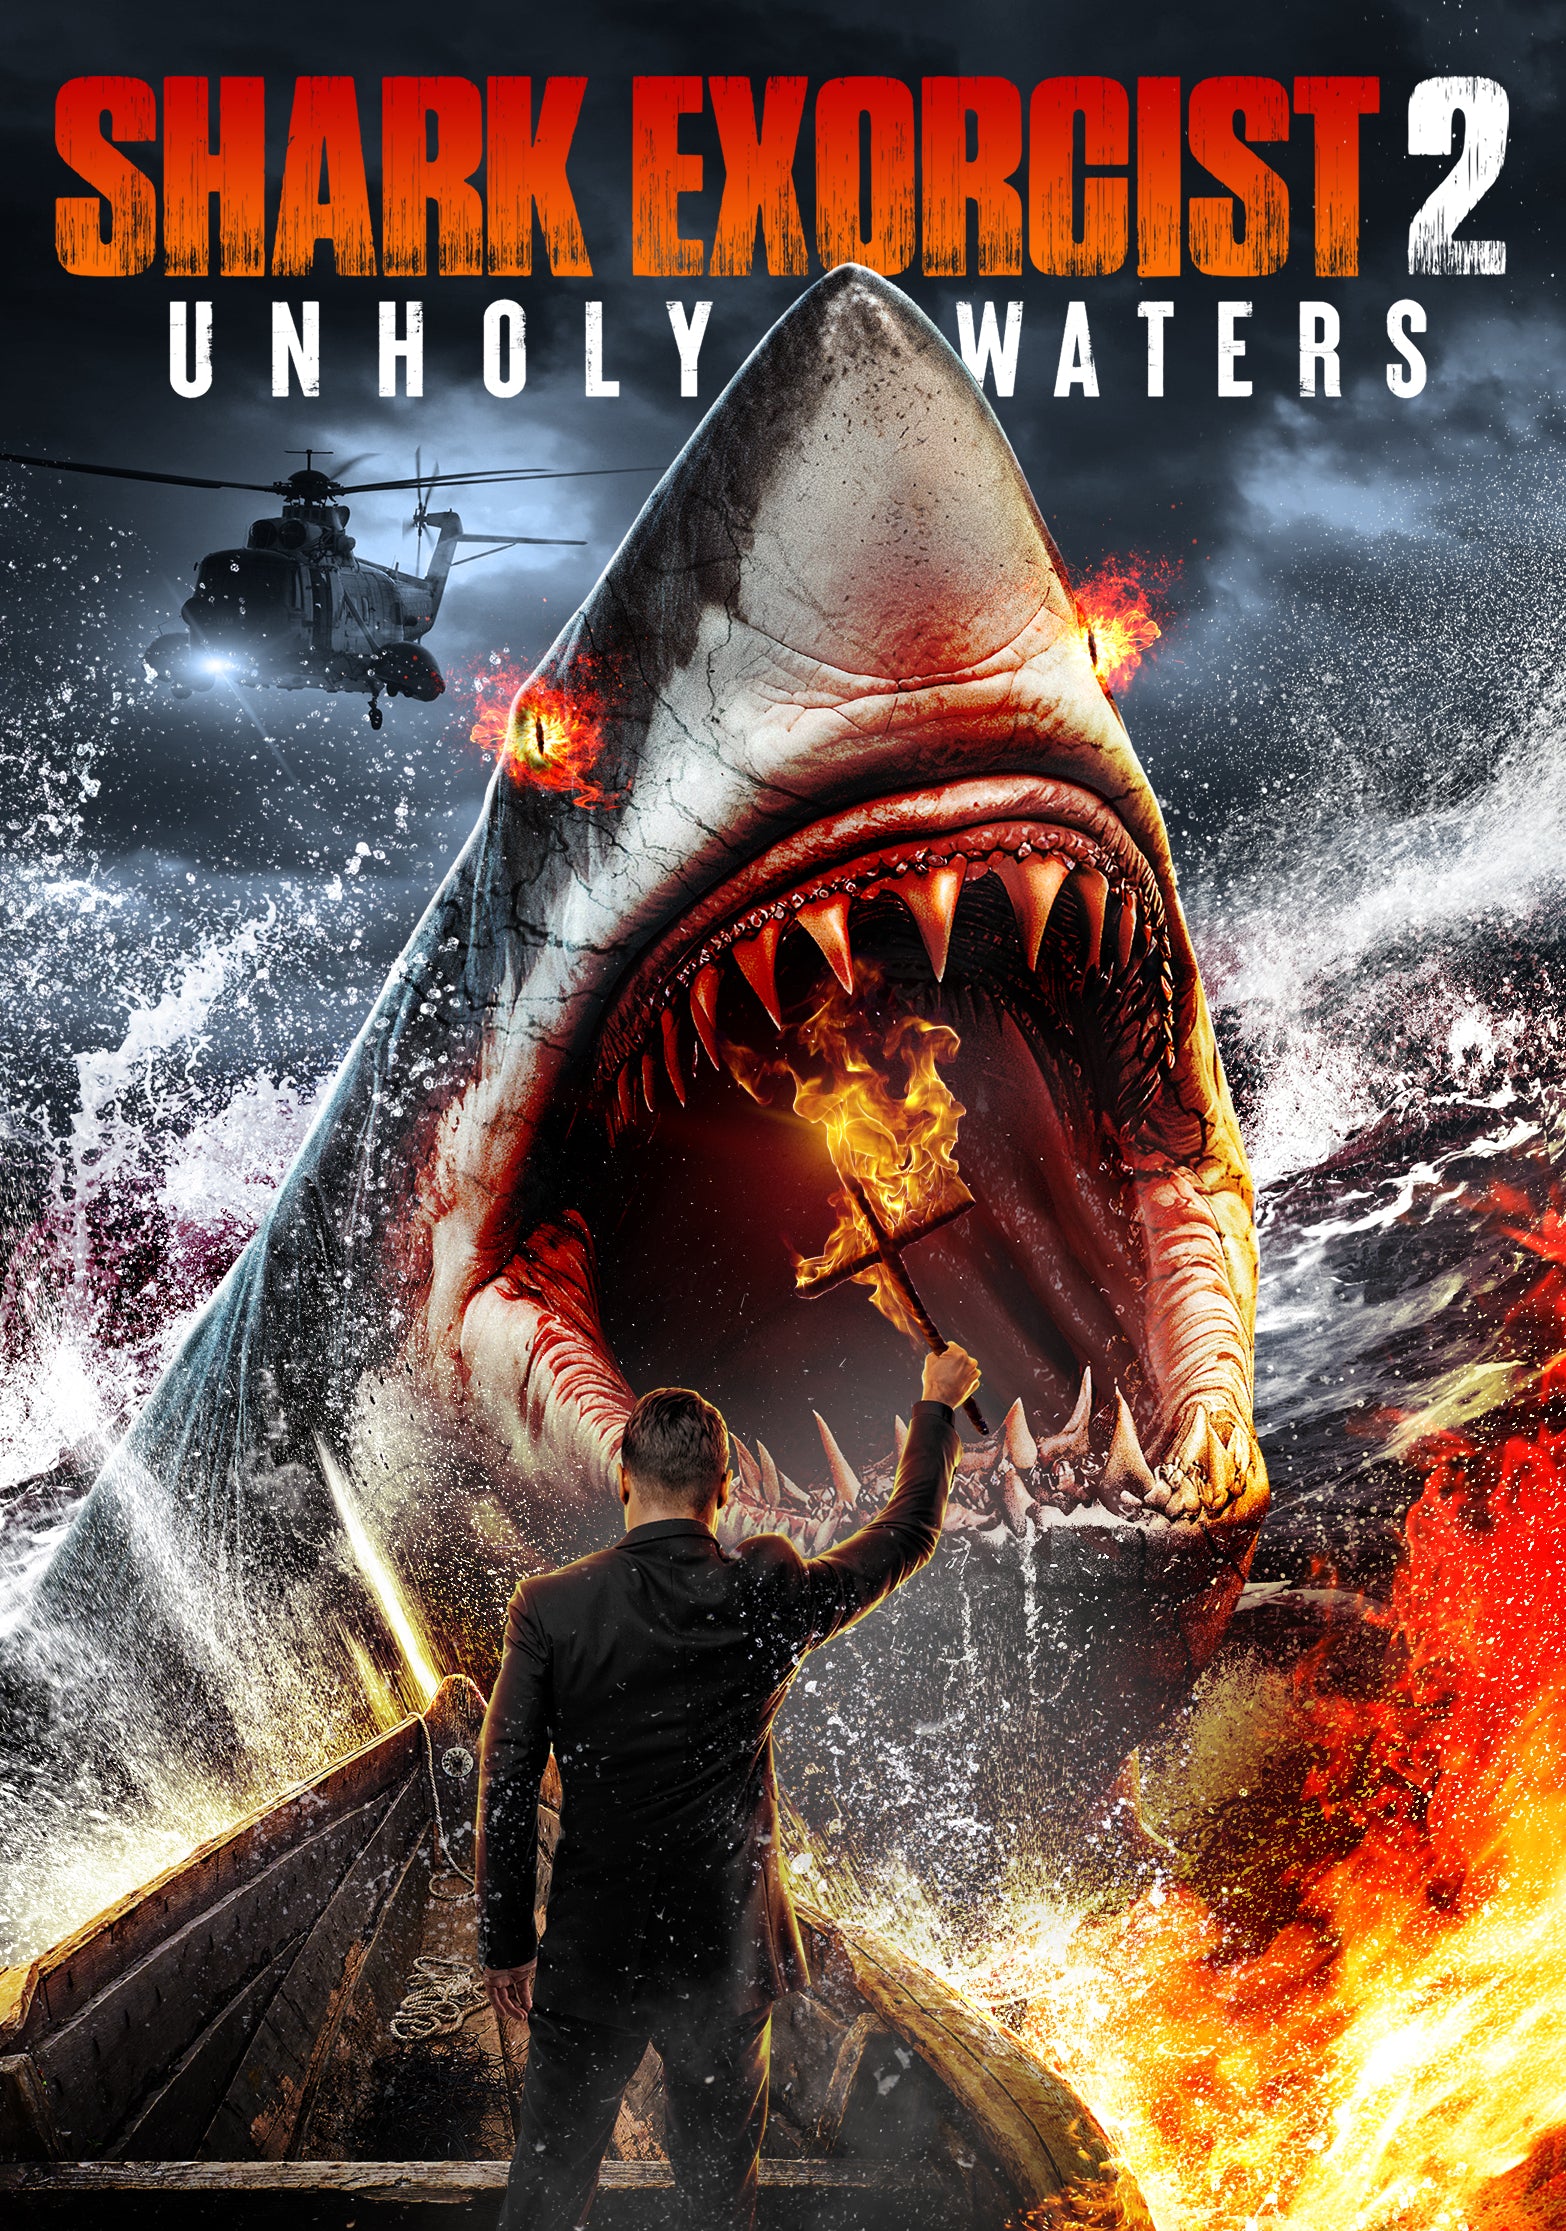 SHARK EXORCIST 2: UNHOLY WATERS DVD